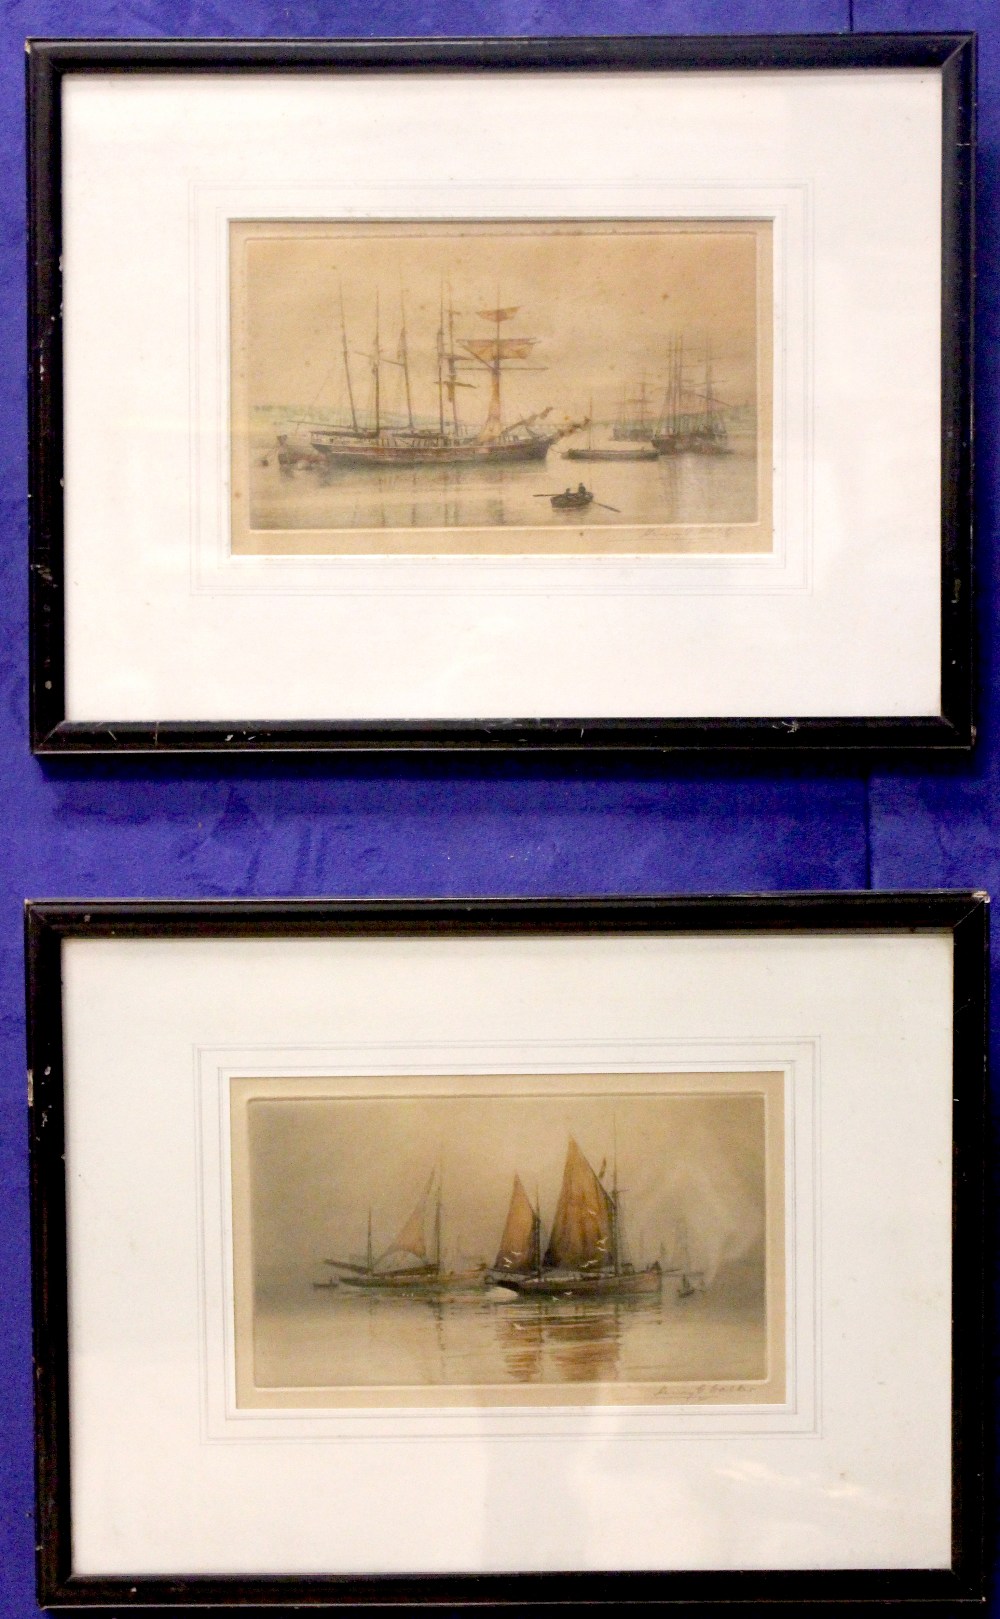 HENRY G. WALKER, A PAIR OF PRINTS, (i) Ships in an Estuary, (ii) Anchored boats, both signed on